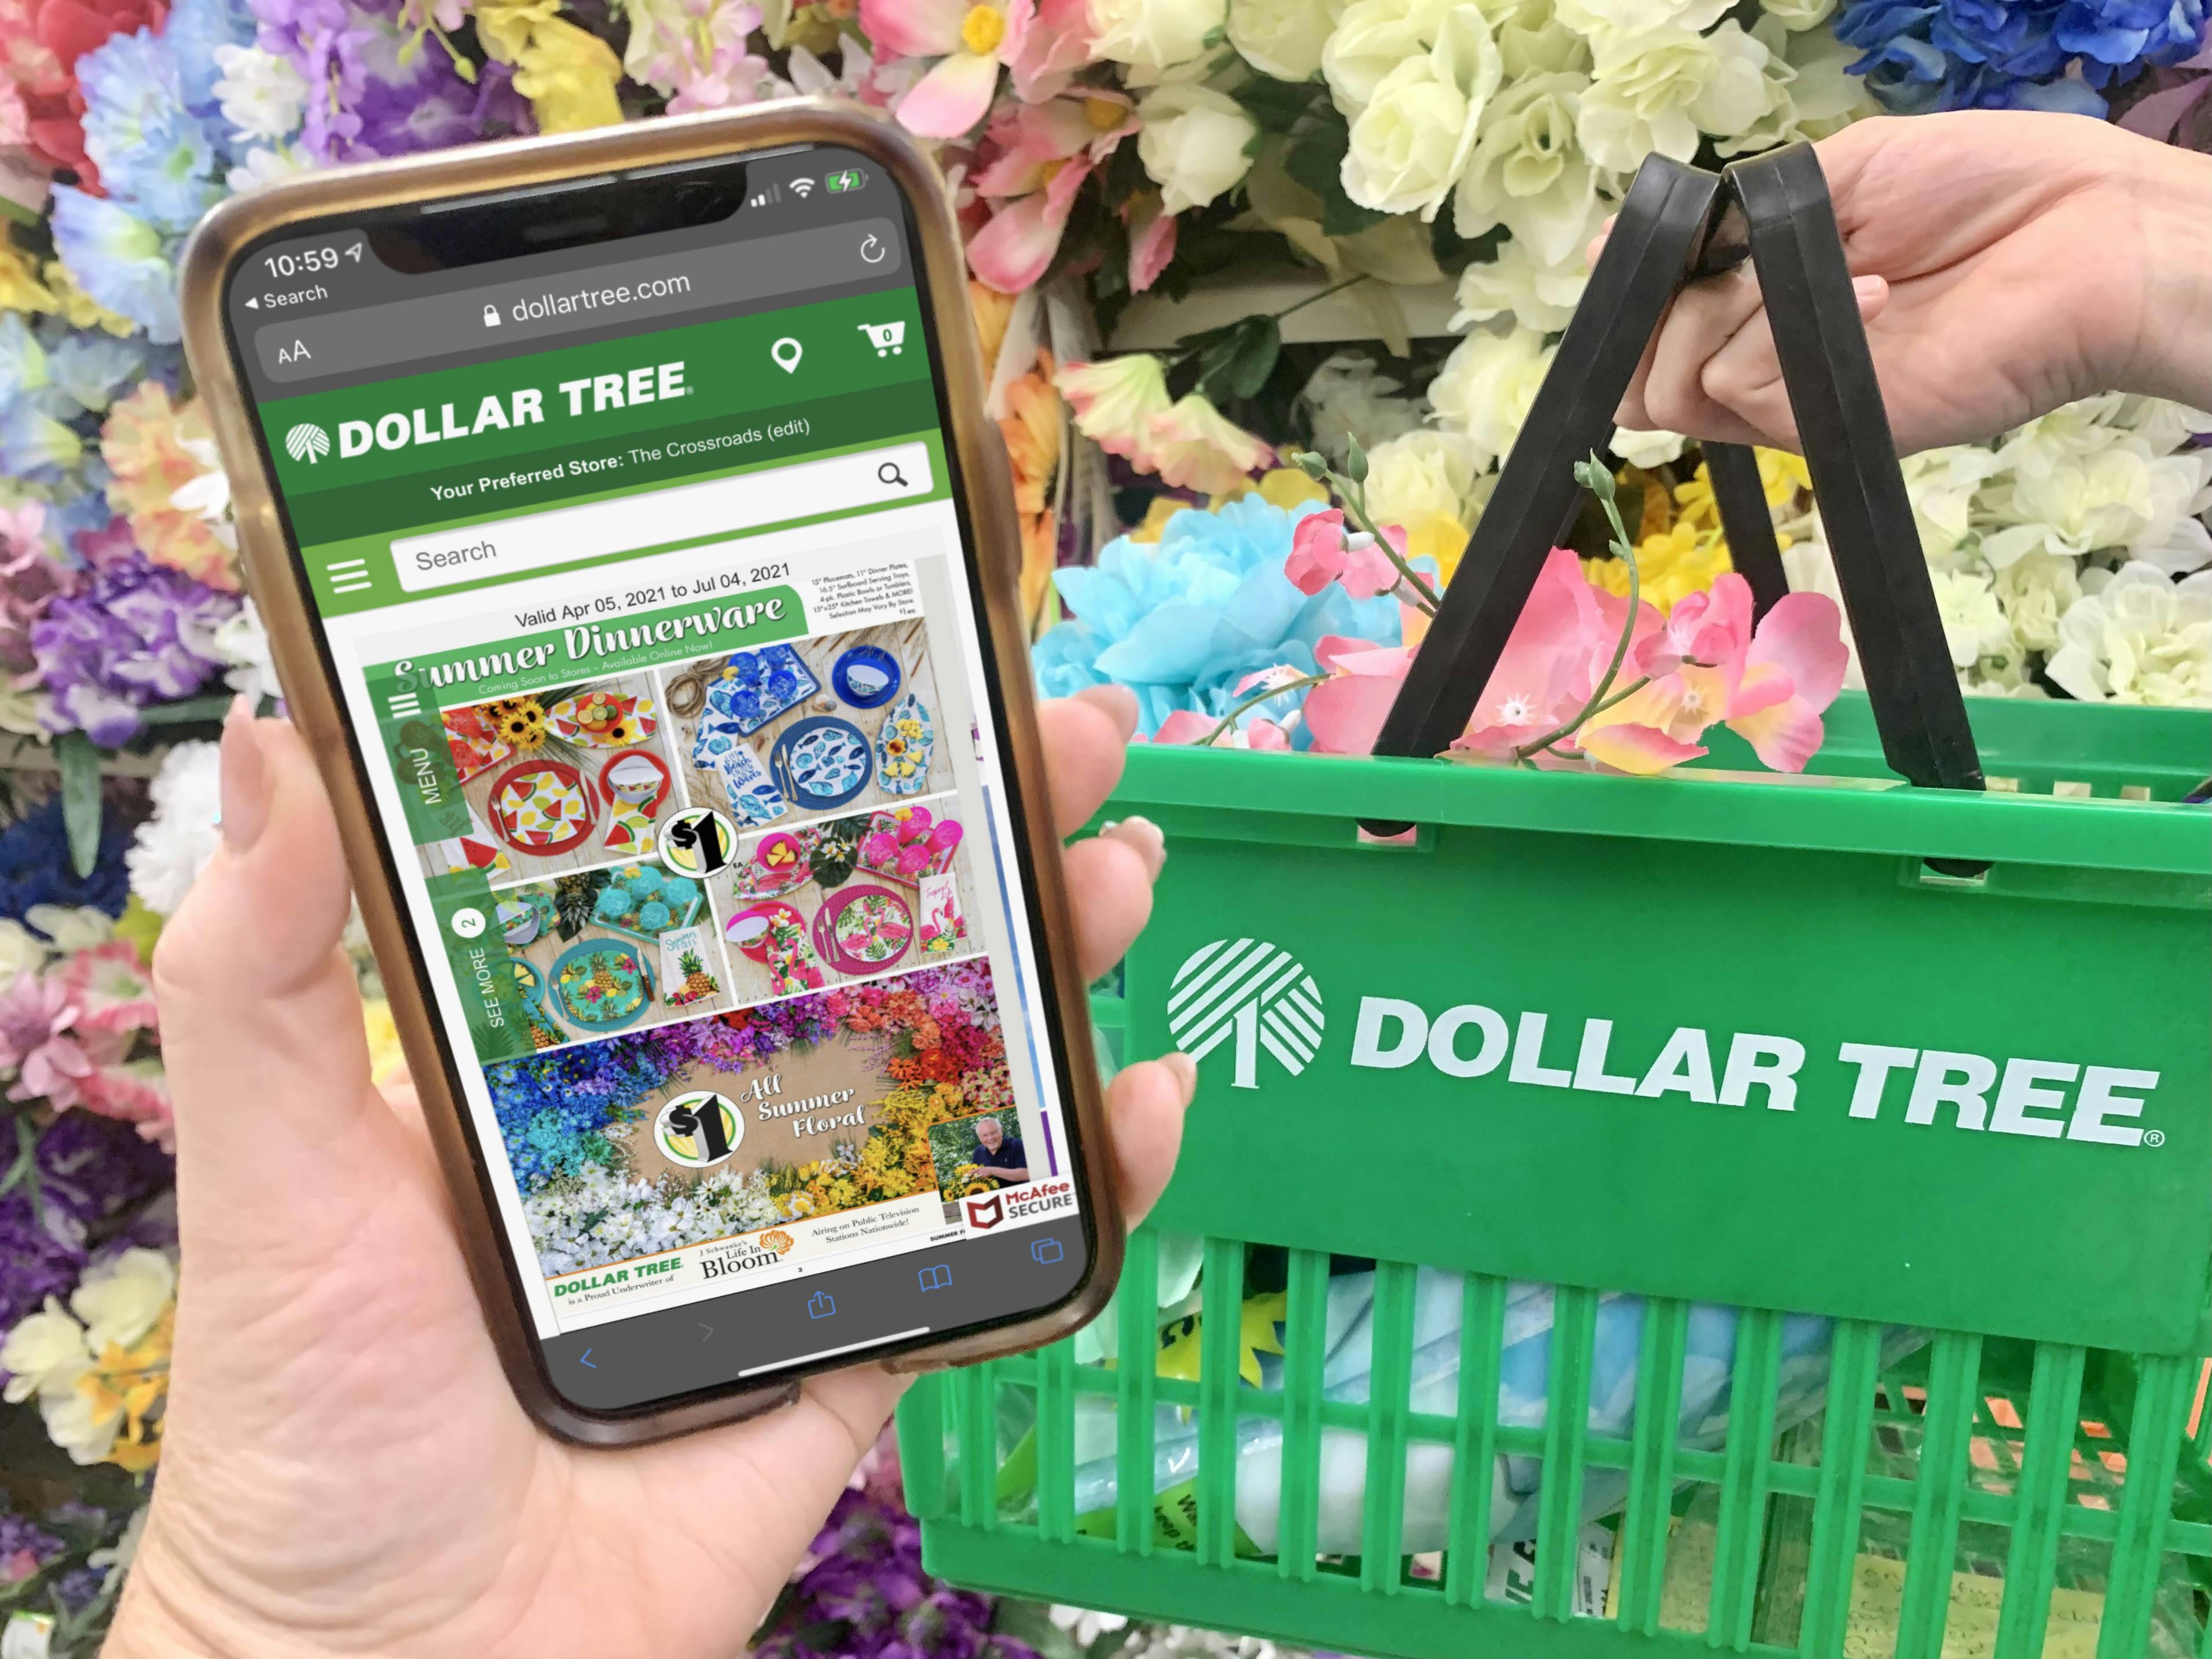 phone being held with dollar tree ad, shopping basket, and floral display